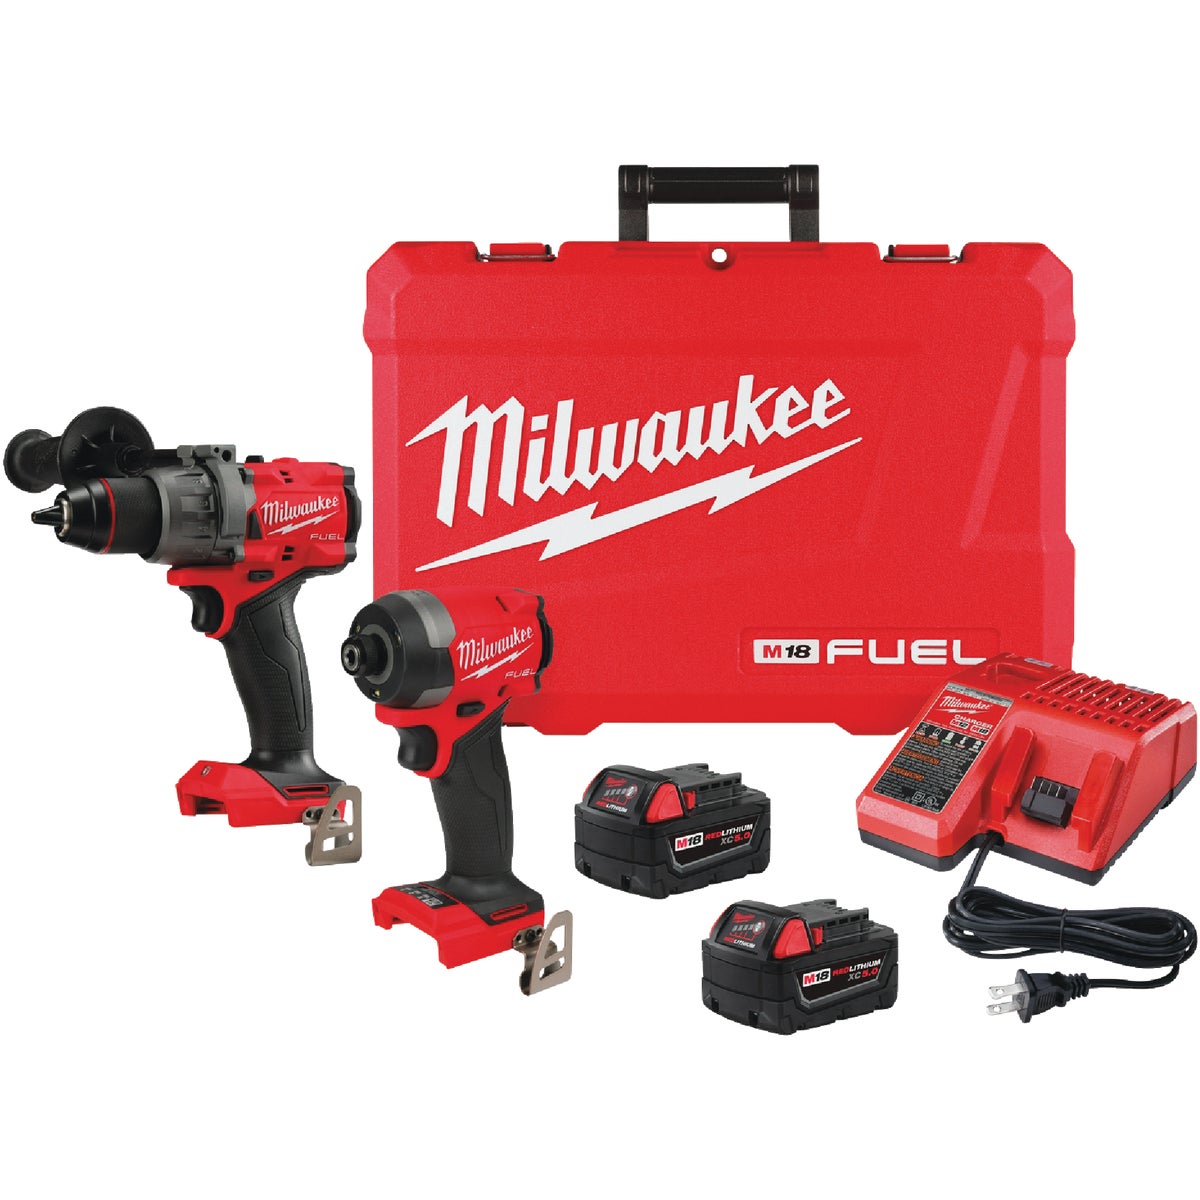 Milwaukee 2-Tool M18 FUEL 18 Volt Lithium-Ion Brushless Hammer Drill & Impact Driver Cordless Tool Combo Kit